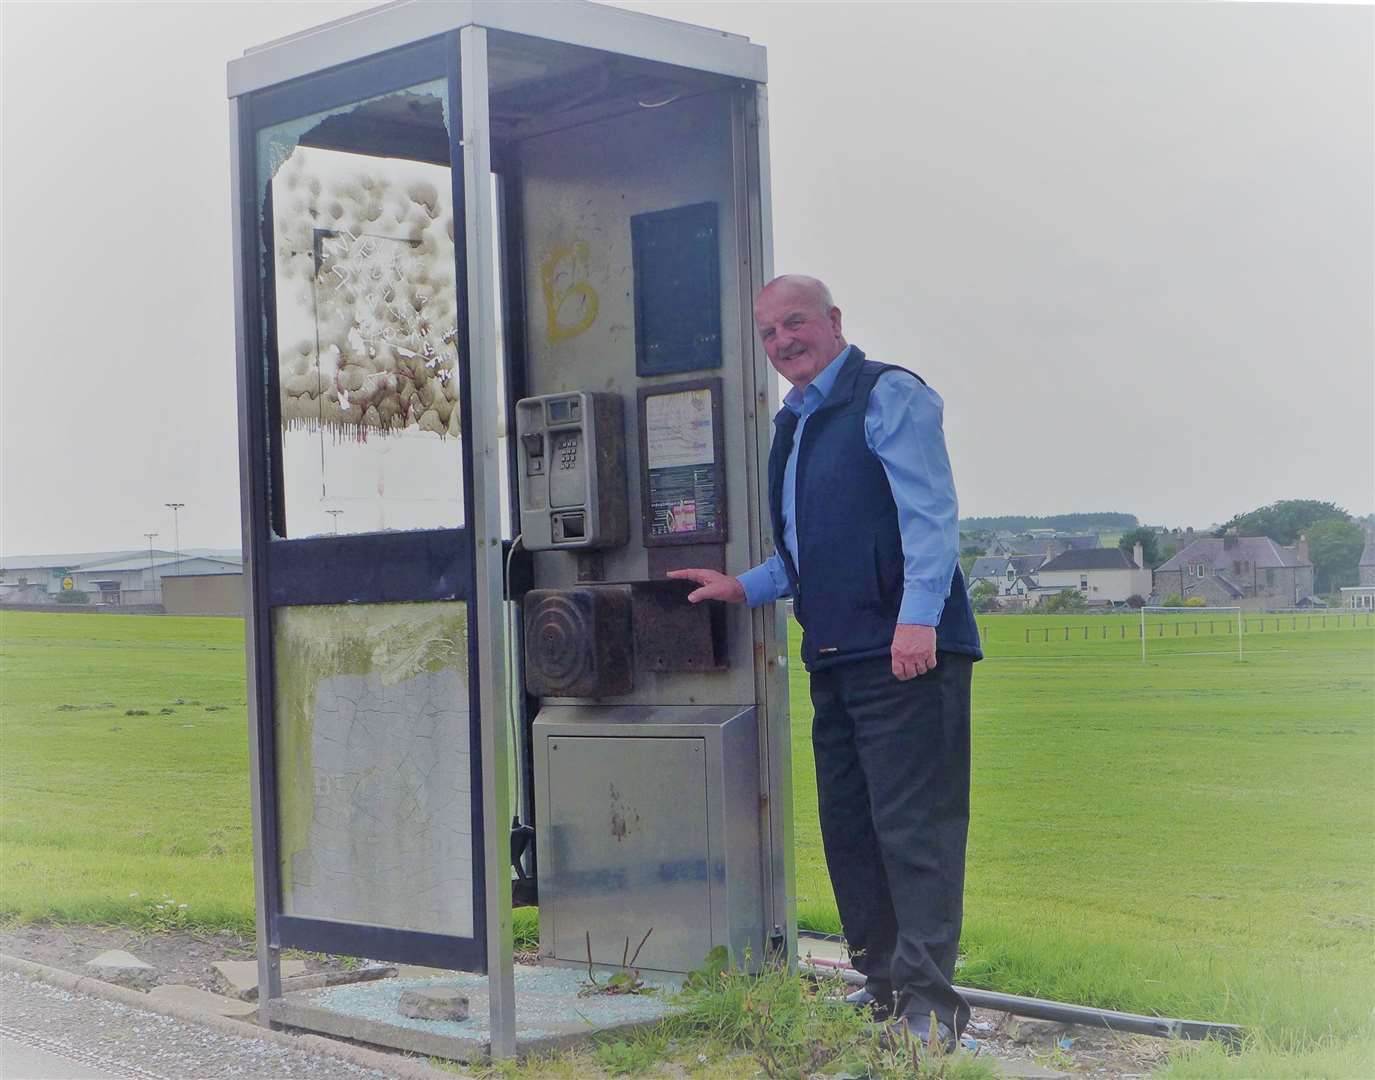 Civic Leader Willie Mackay visited all the Caithness phone boxes at risk but was dismayed over the state of this one in Wick which had been badly vandalised.